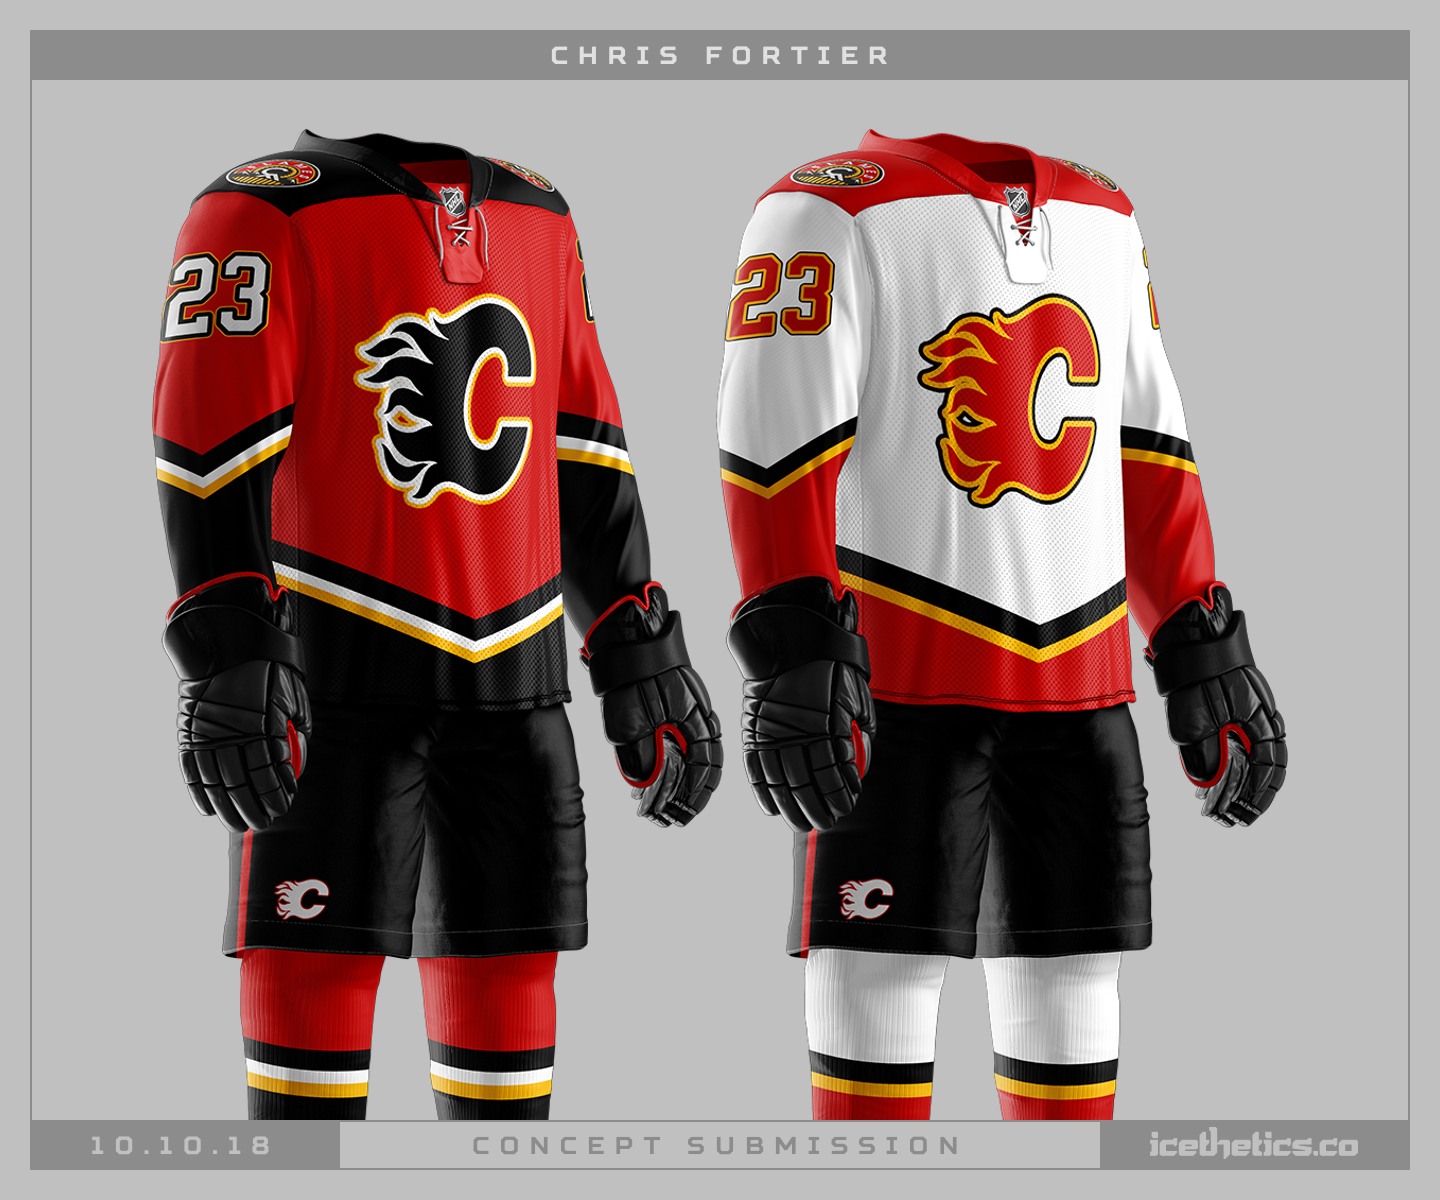 patch on calgary flames jersey